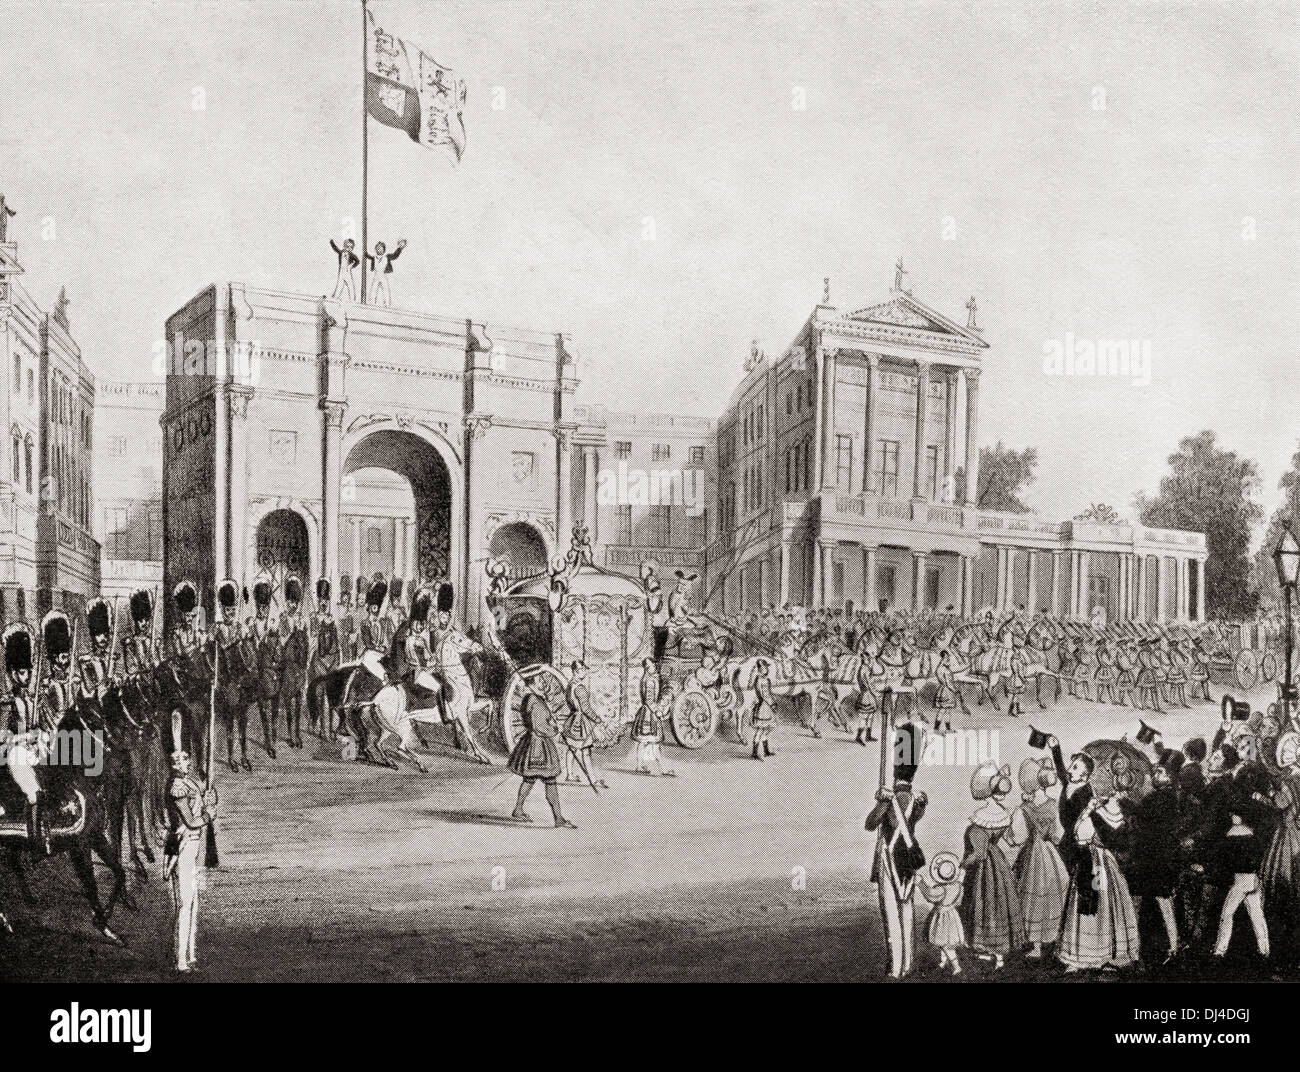 Coronation procession of Queen Victoria in 1838, leaving Buckingham Palace through the Marble Arch. Stock Photo